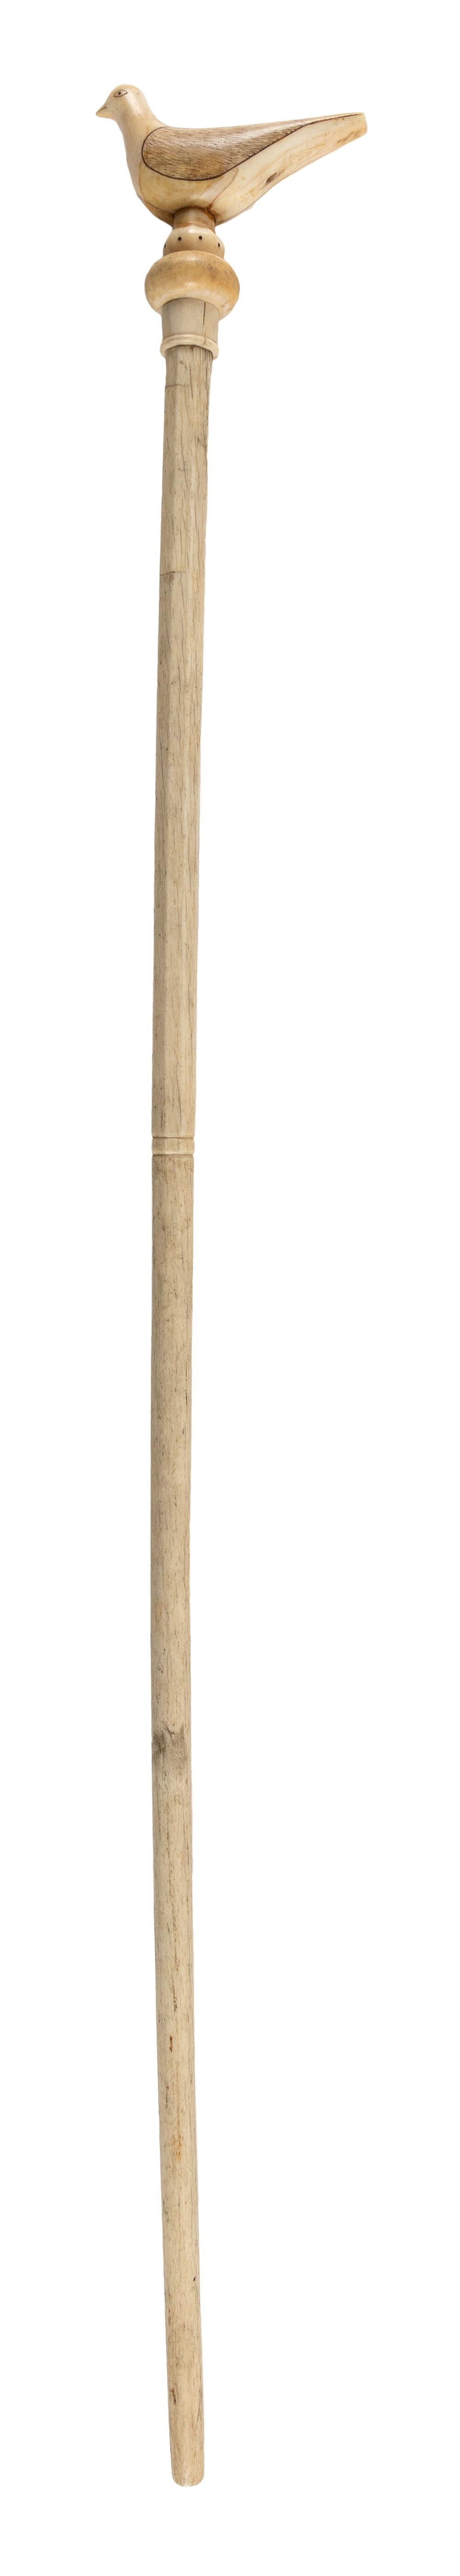 CANE WITH SCRIMSHAW WHALE IVORY 3501c3